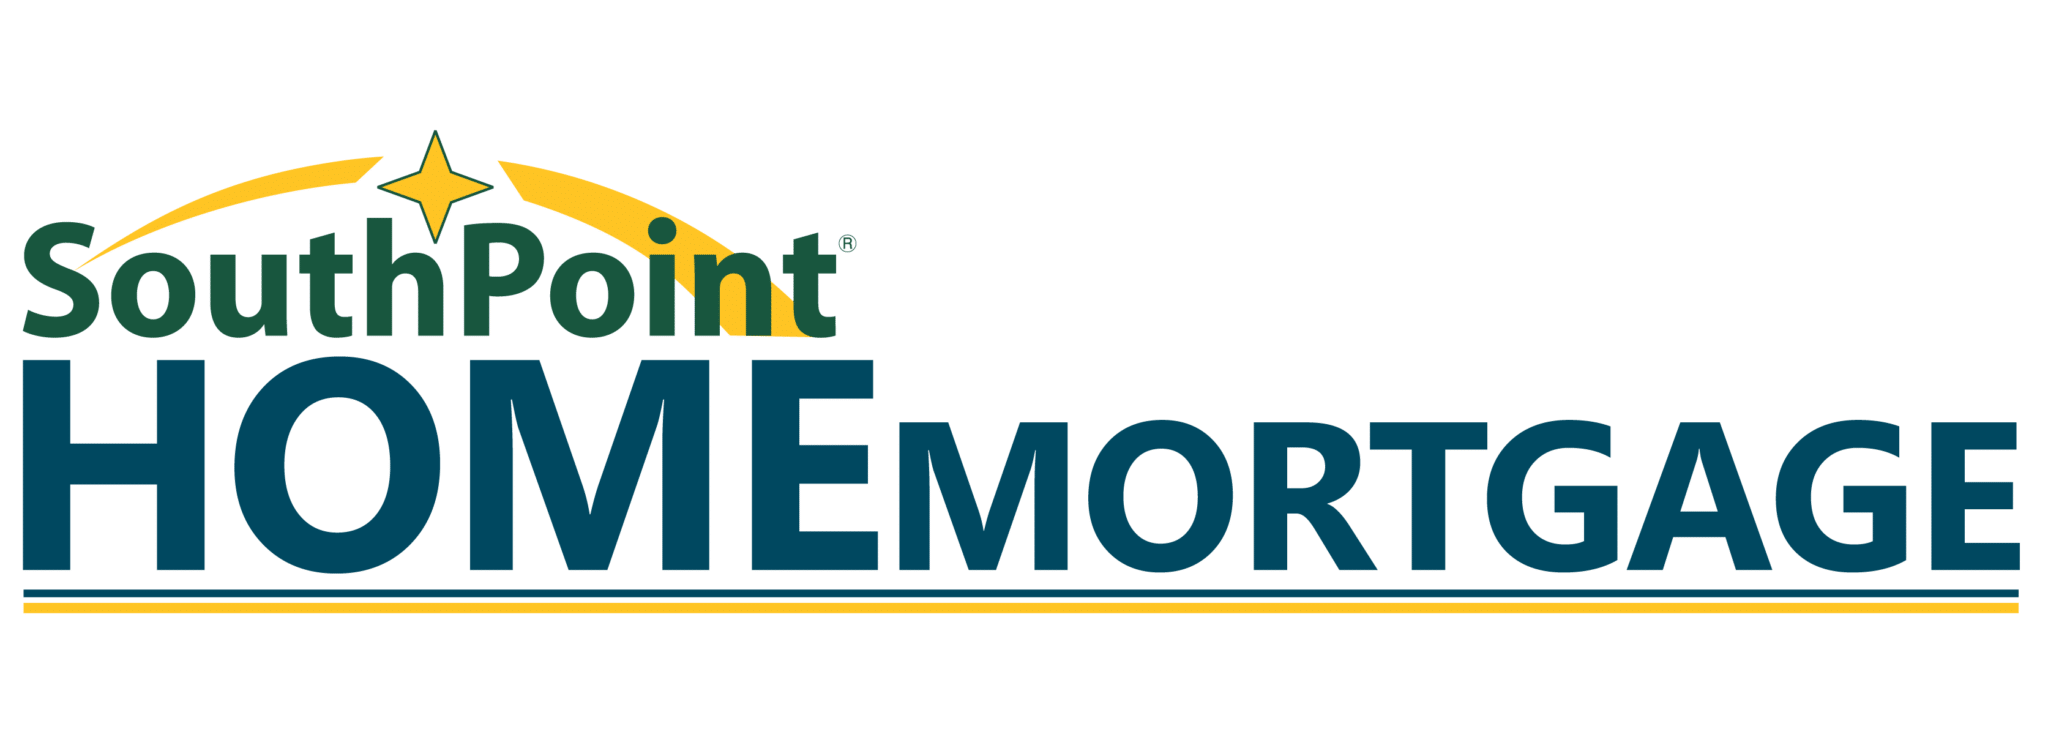 SouthPoint Home Mortgage logo